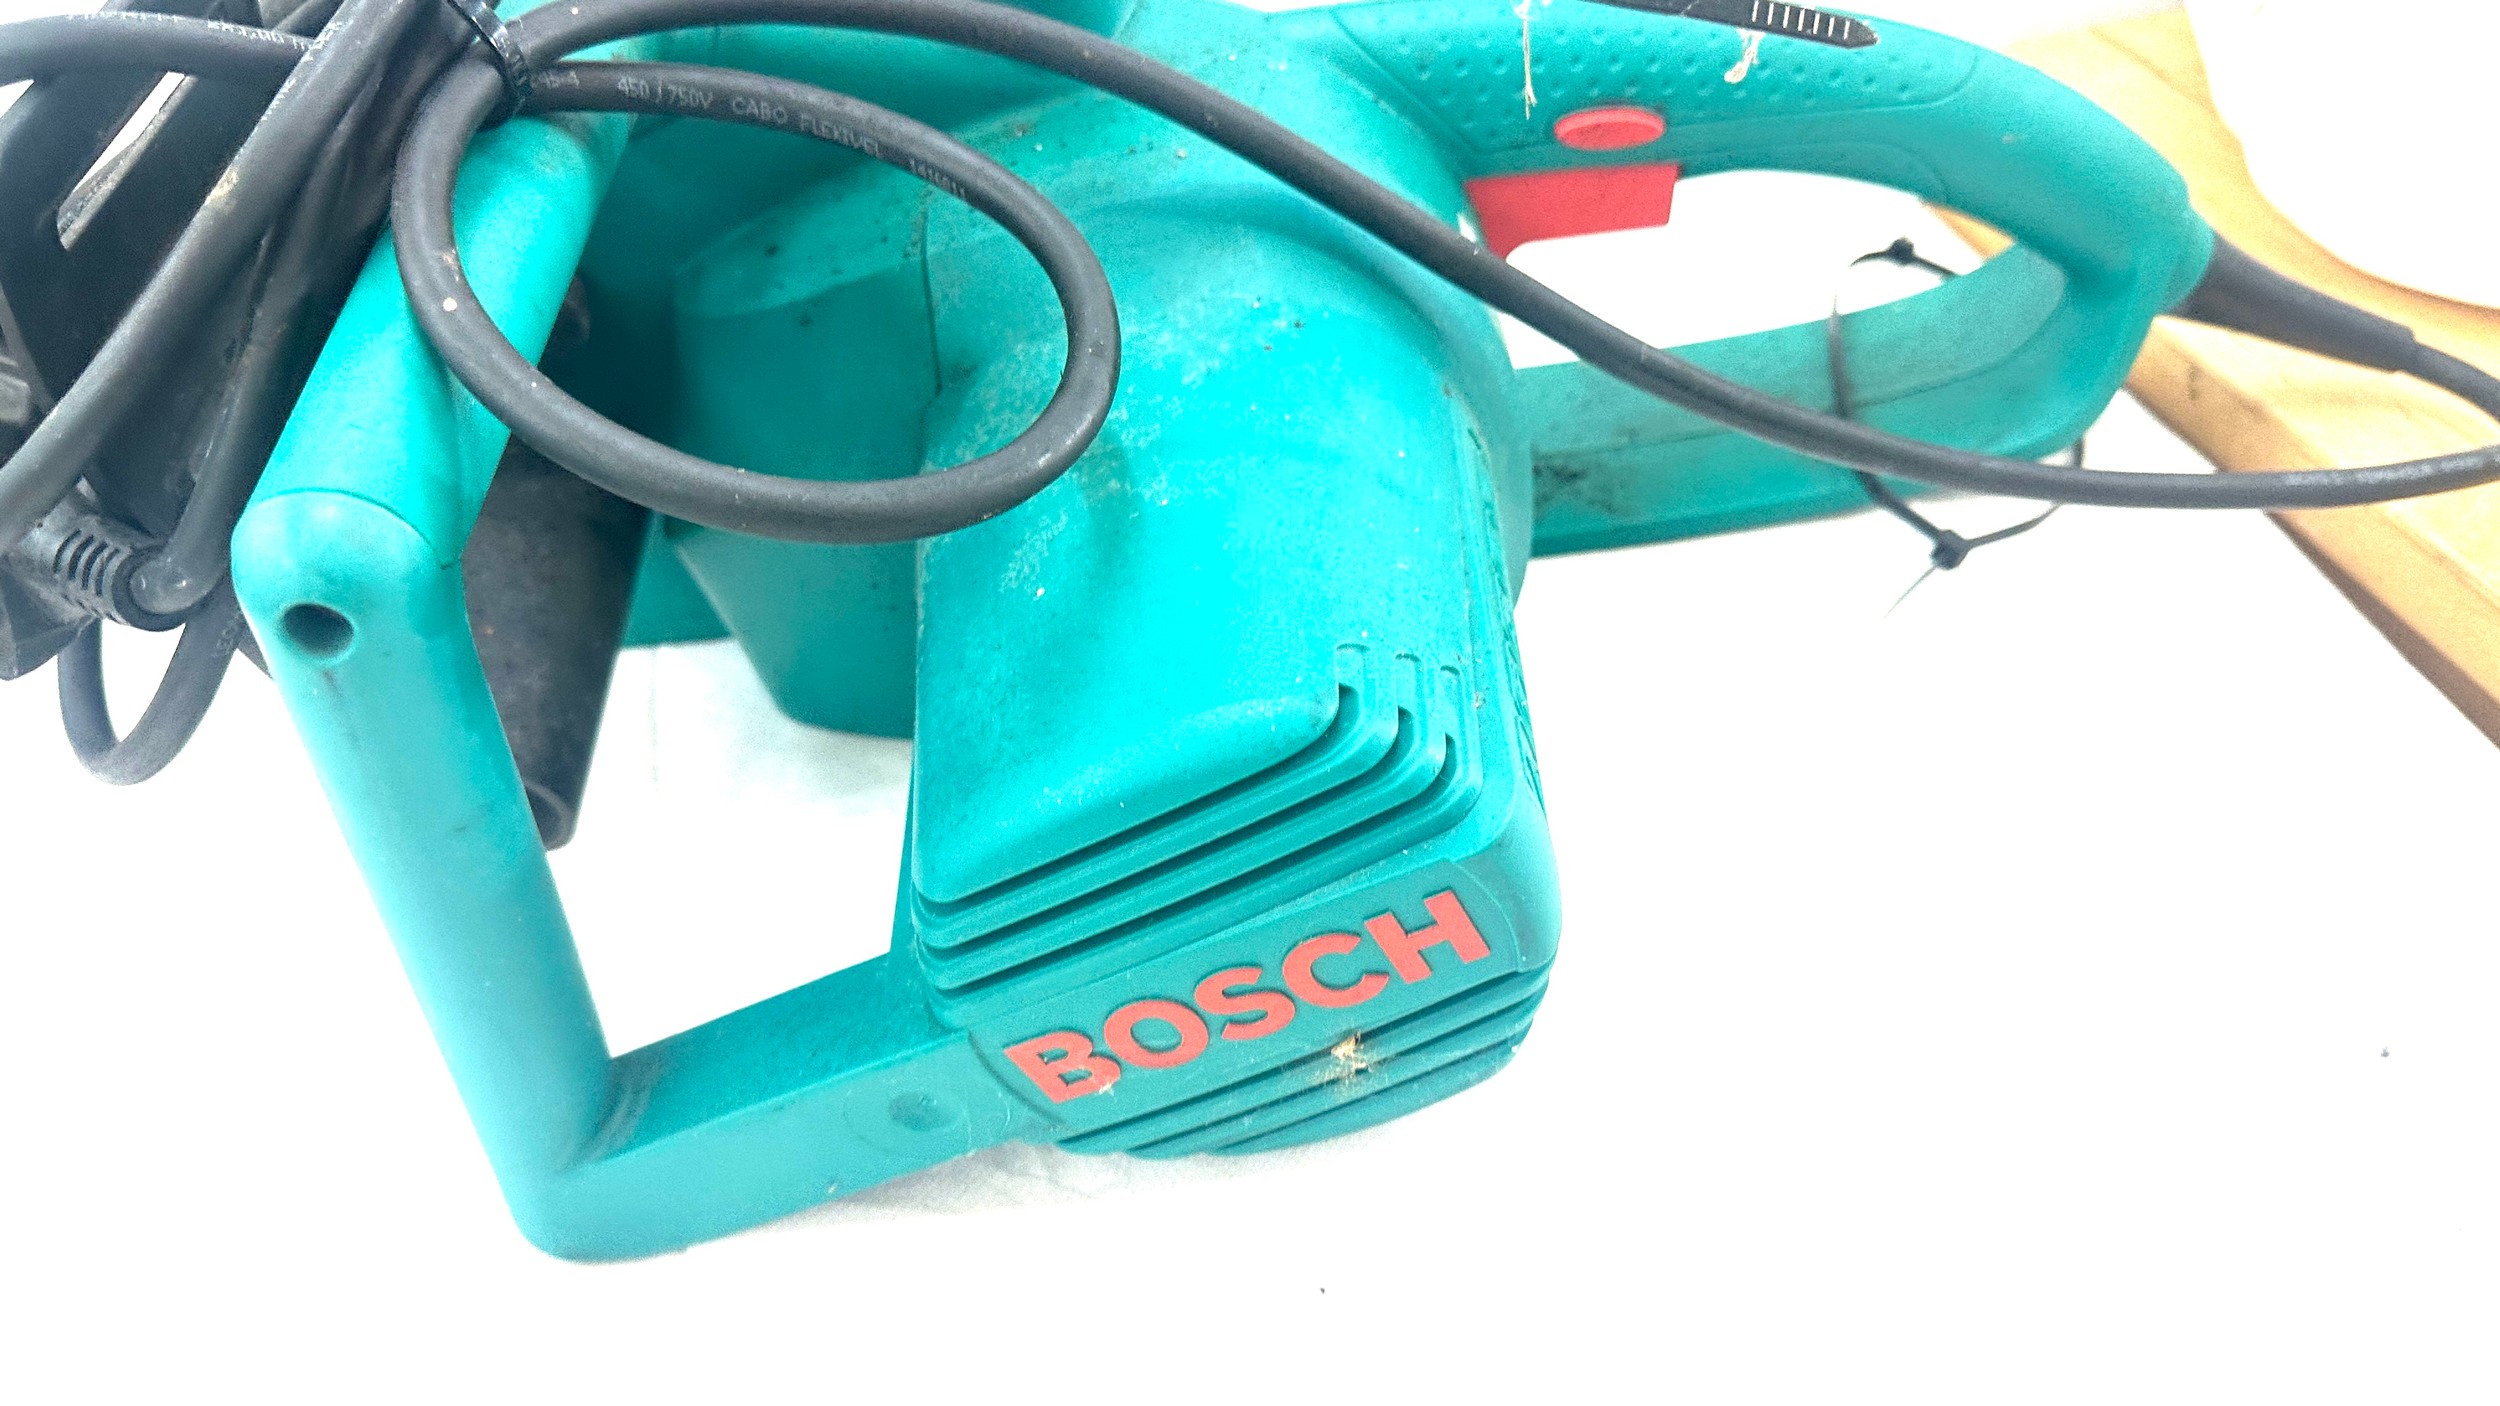 Bosch 8ke 35s chain saw, untested - Image 2 of 3